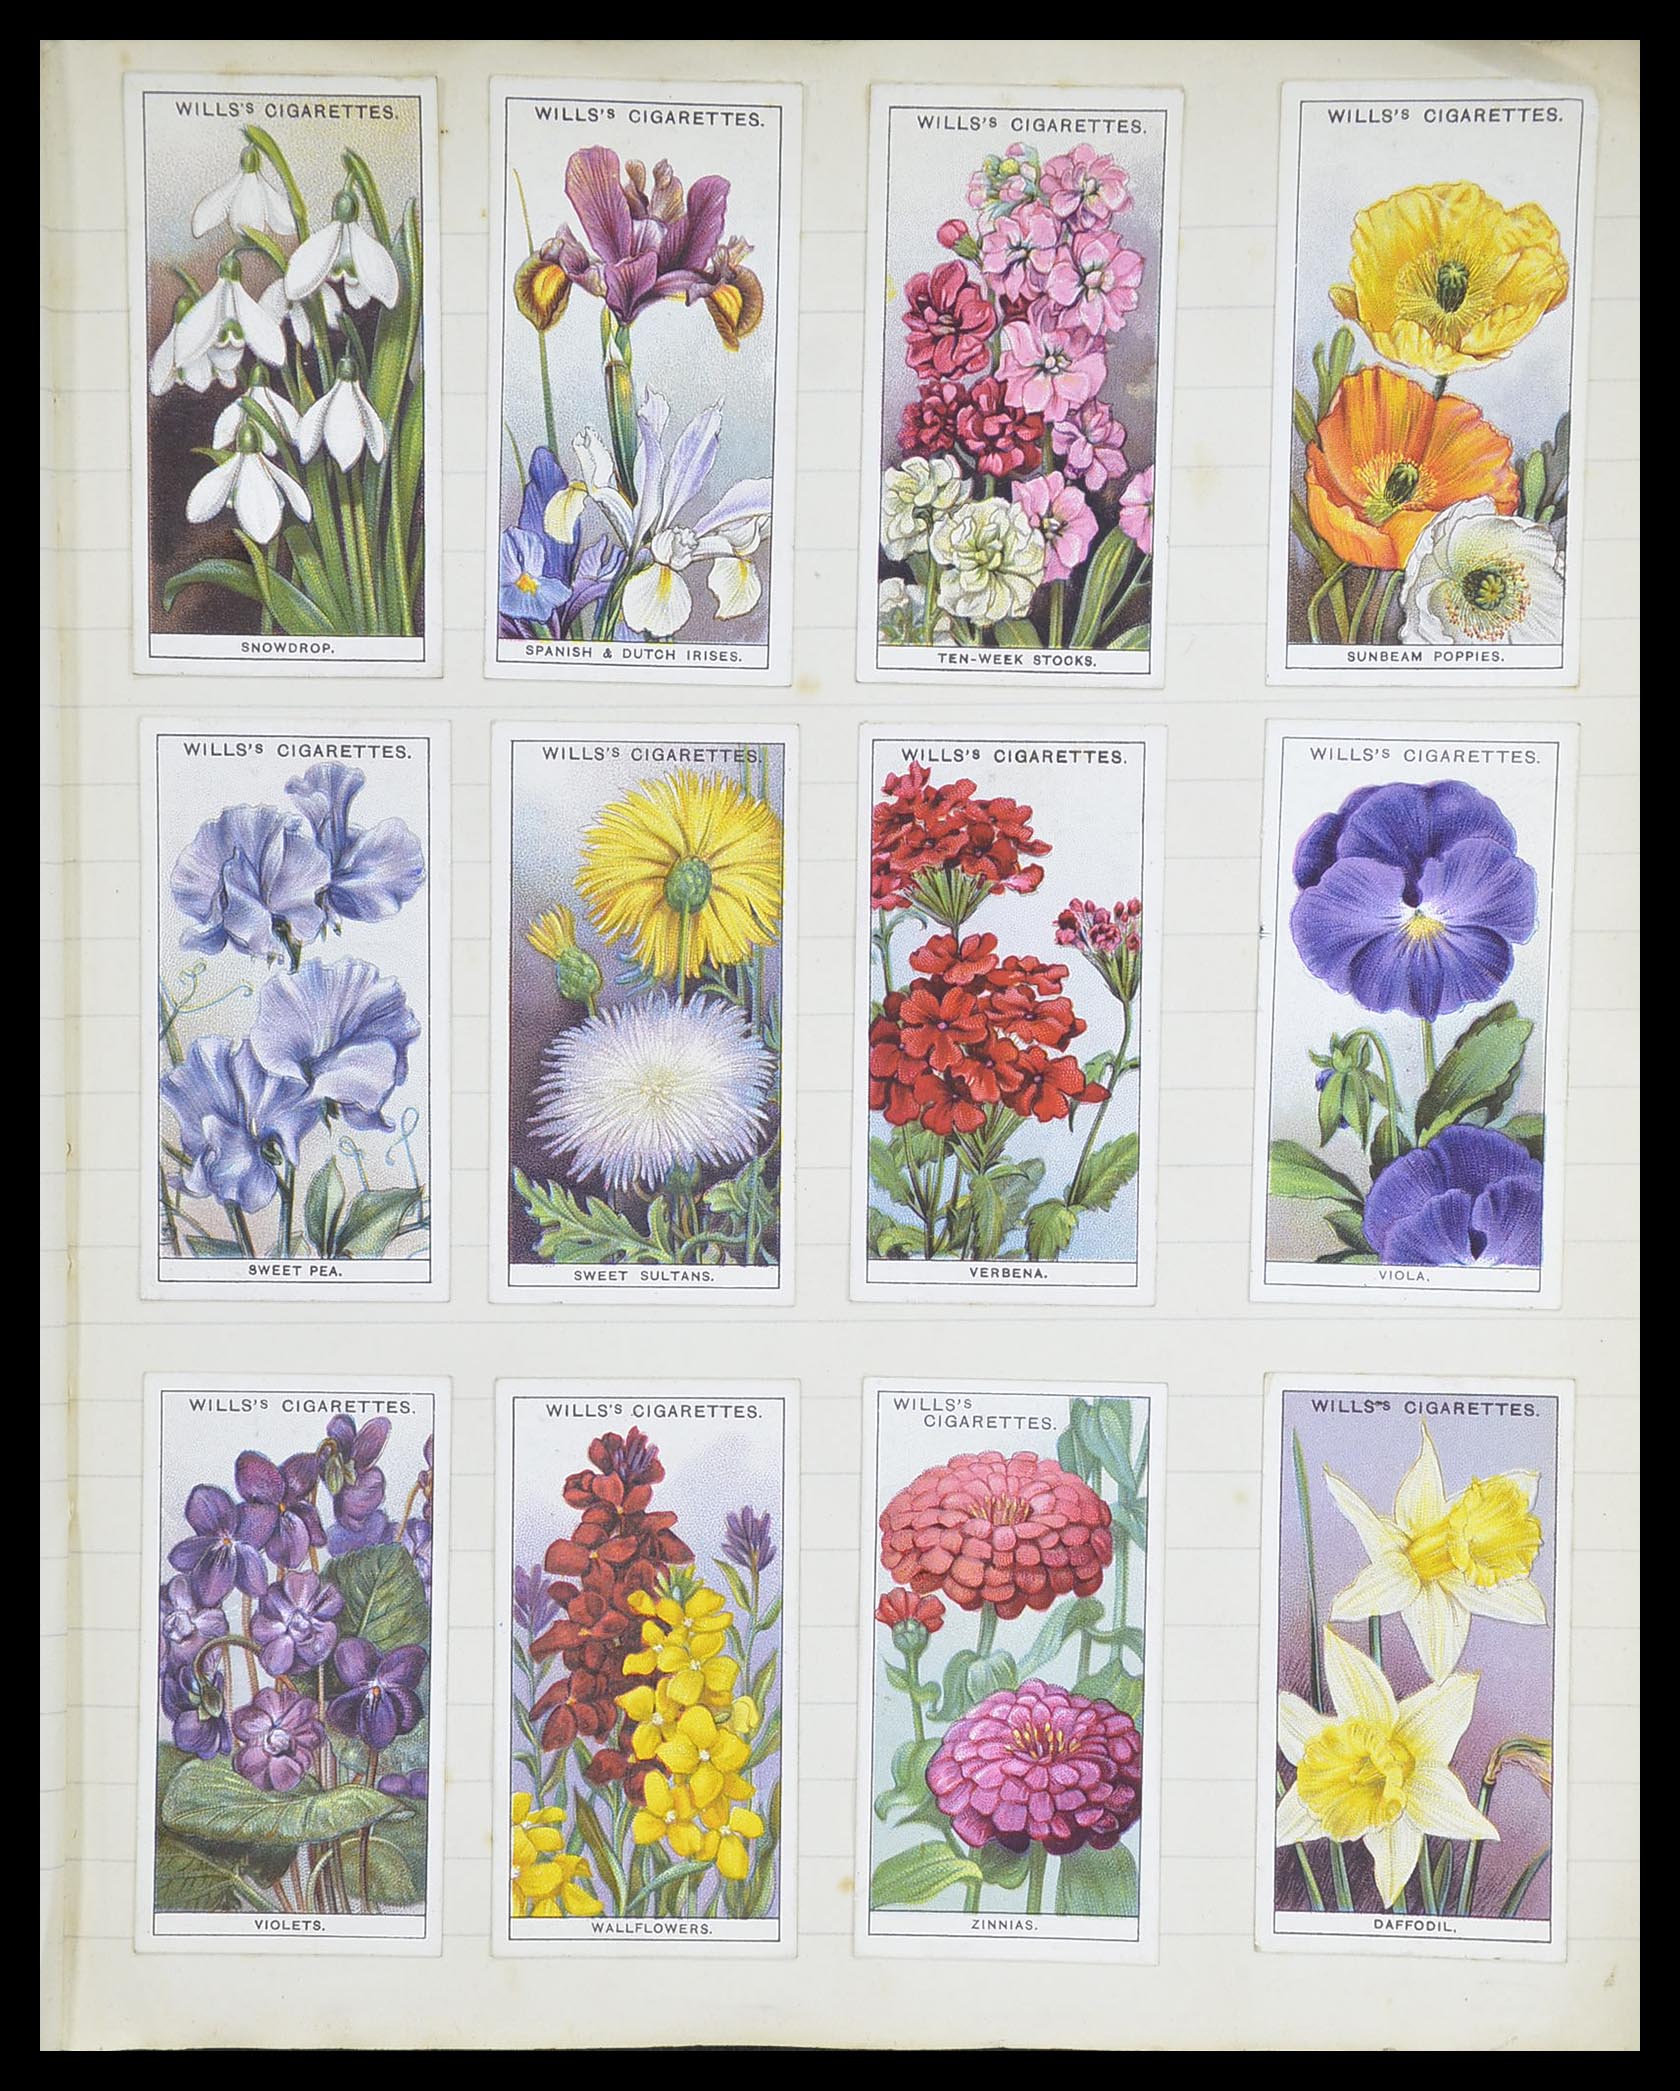 33444 077 - Stamp collection 33444 Great Britain cigarette cards.